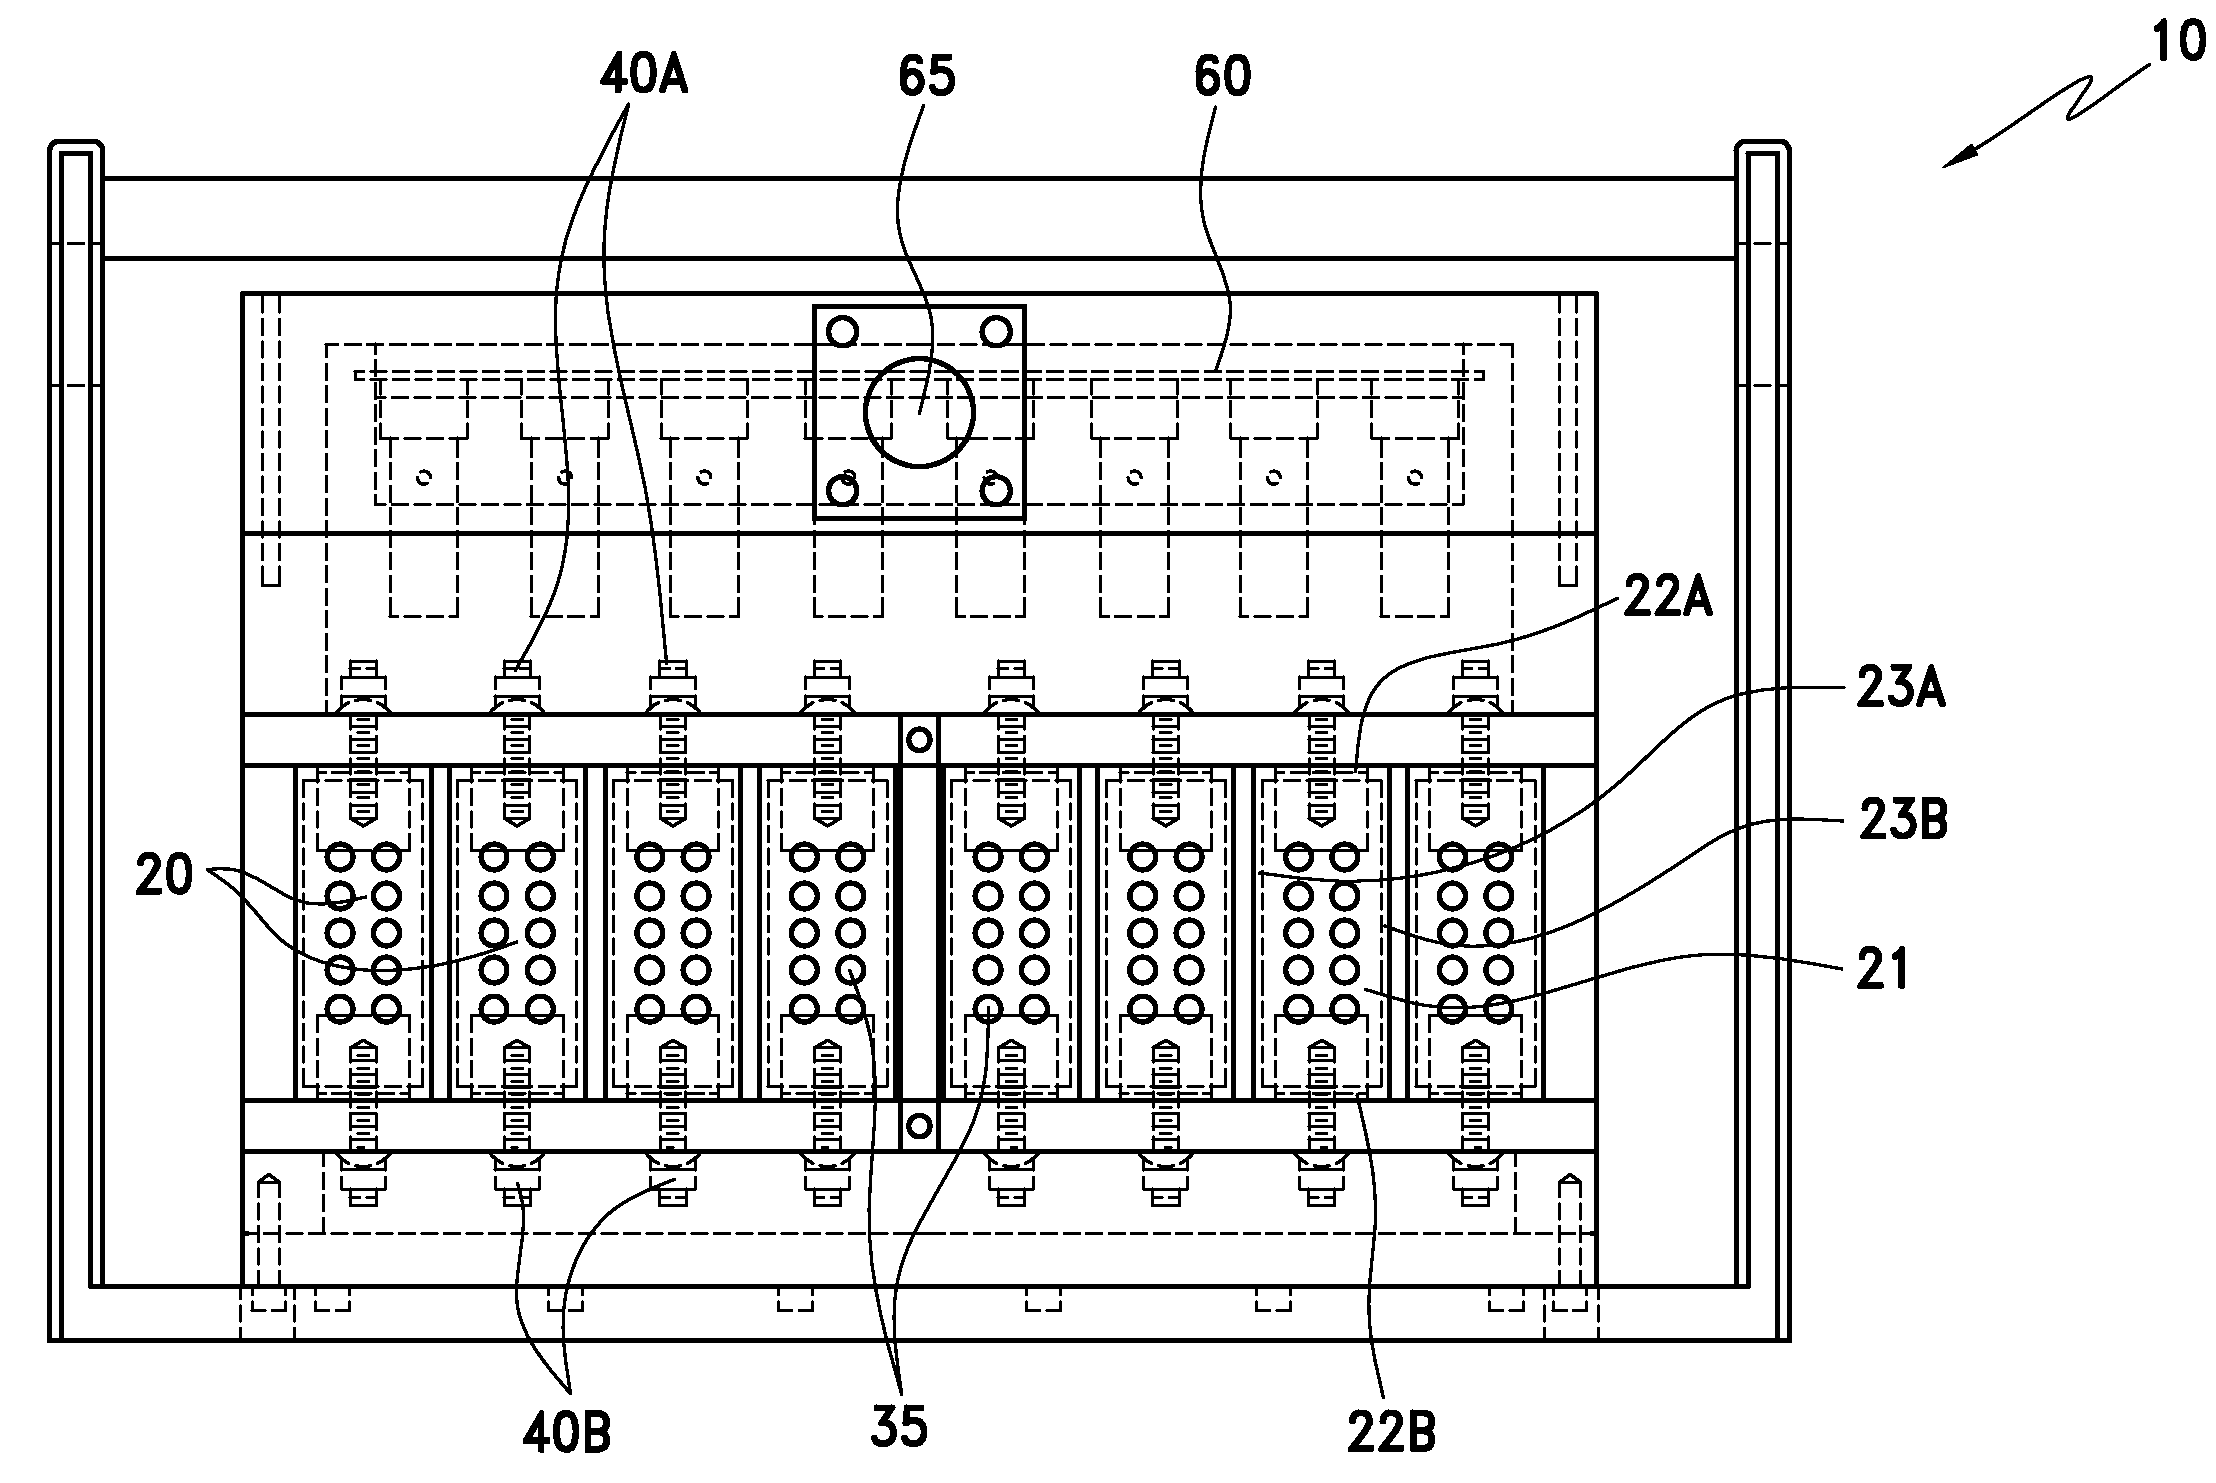 Submersible portable in-situ automated water quality biomonitoring apparatus and method